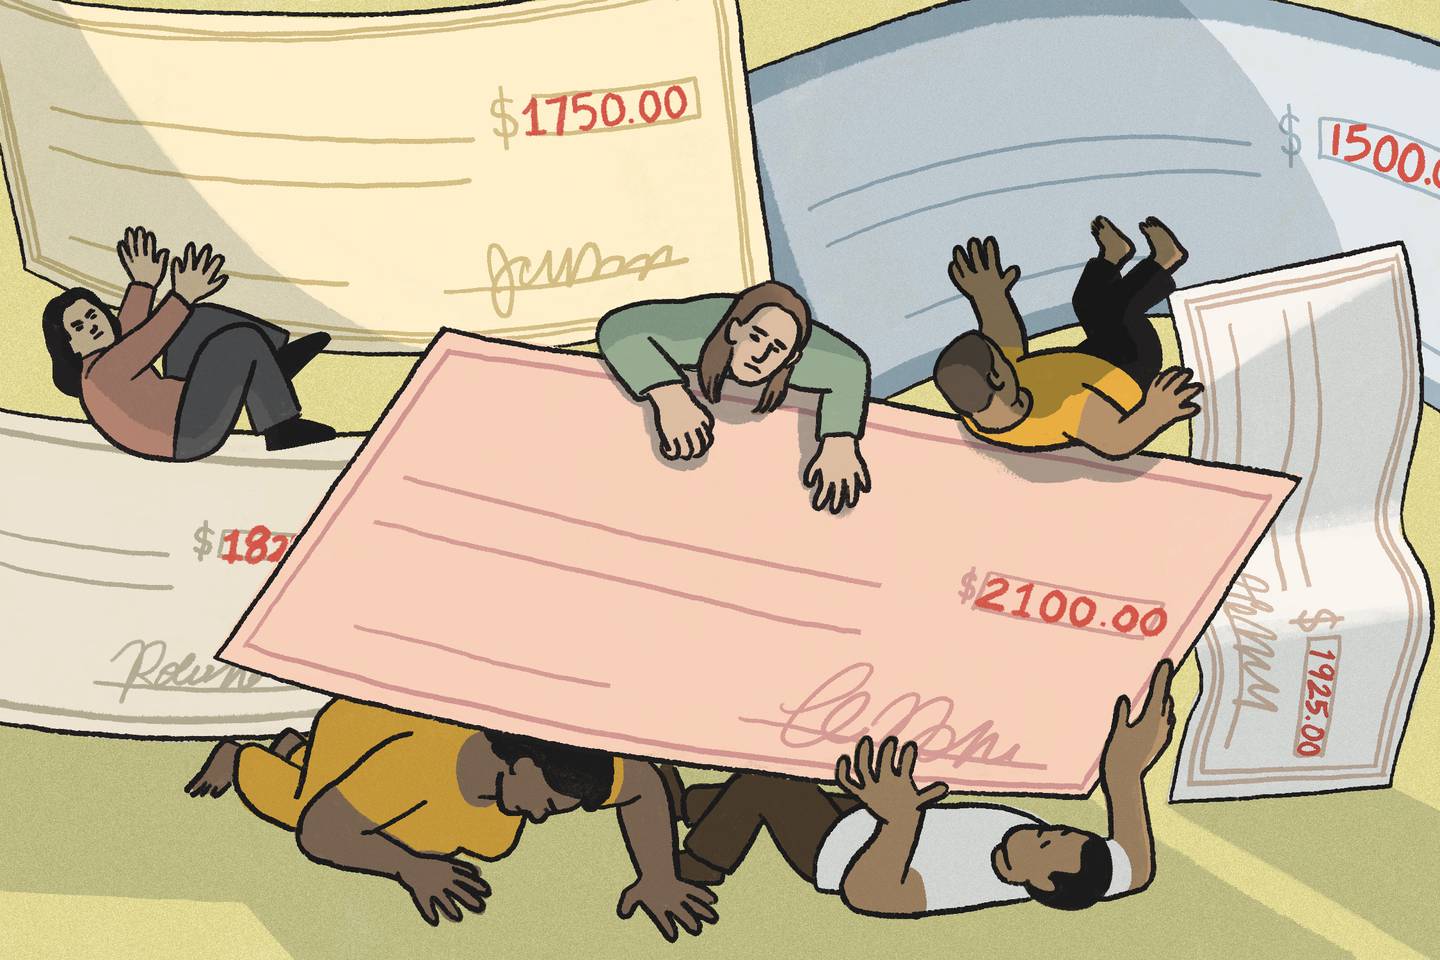 Various people crushed and flattened by giant checks